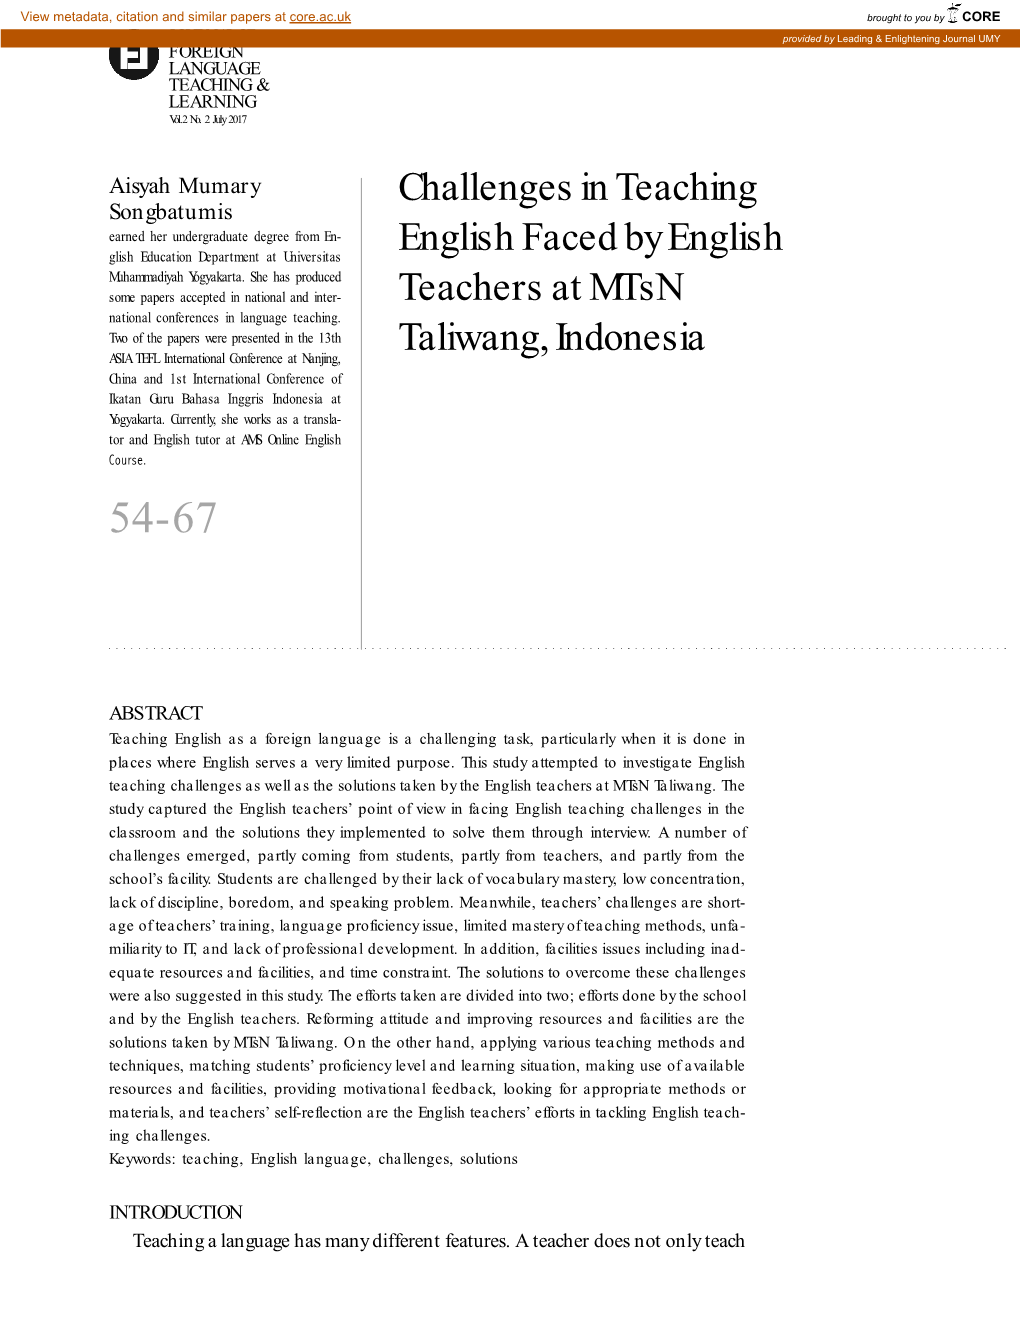 Challenges in Teaching English Faced by English Teachers at Mtsn Taliwang, Indonesia